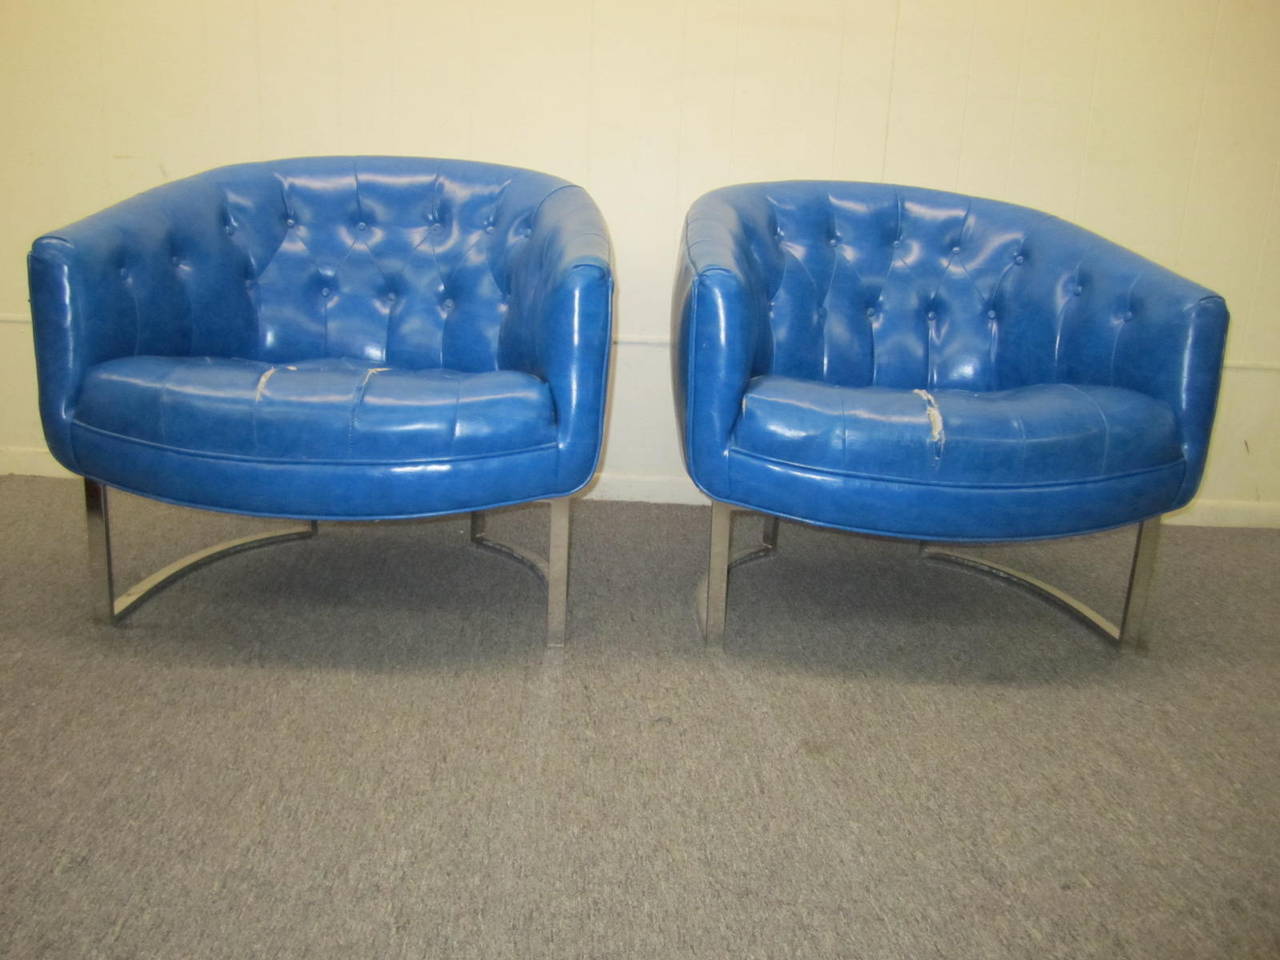 Stunning pair of Milo Baughman style chrome tub chairs. The faux blue leather will need to be replaced but that's what you designers are looking for anyway right? Chrome frames are shiny and look great.